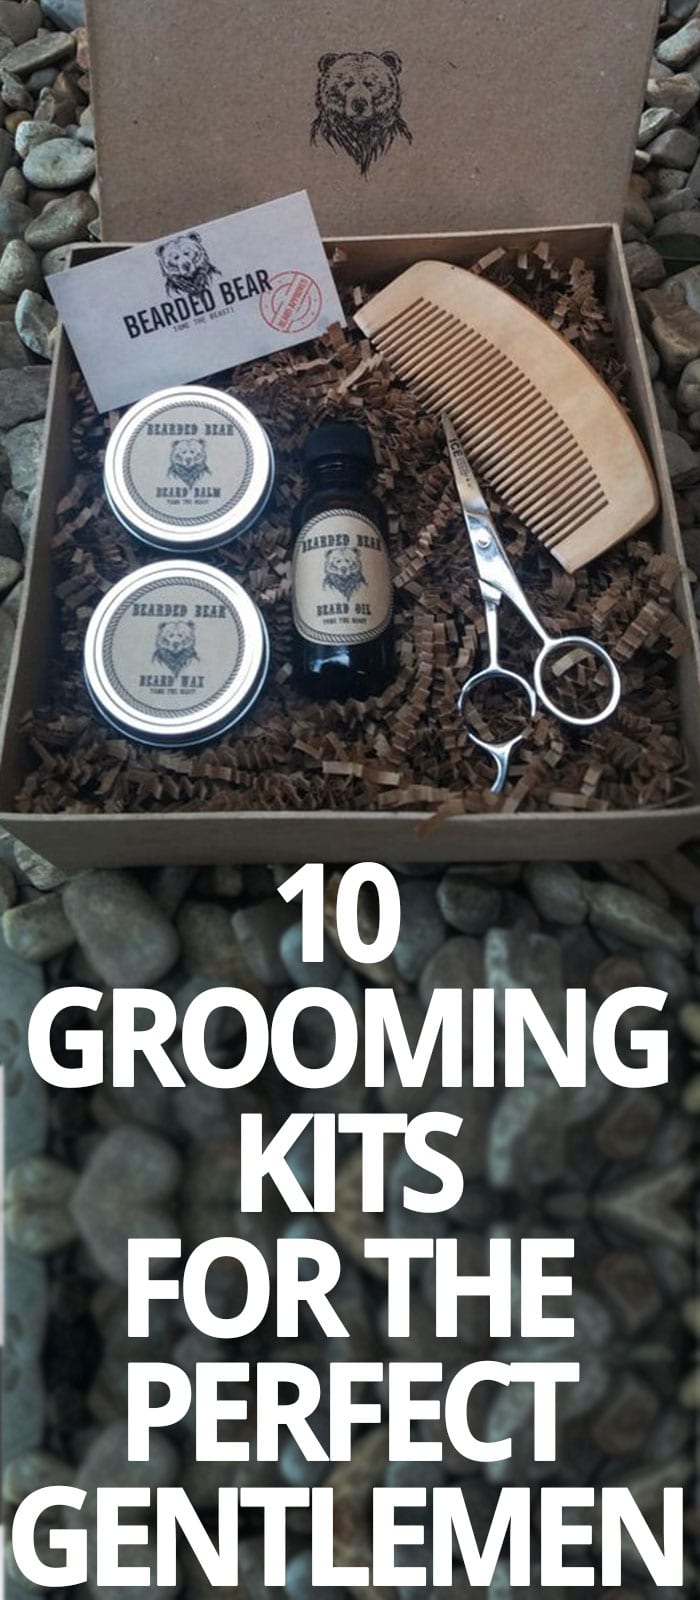 GROOMING-KITS-FOR-THE-PERFECT-GENTLEMAN